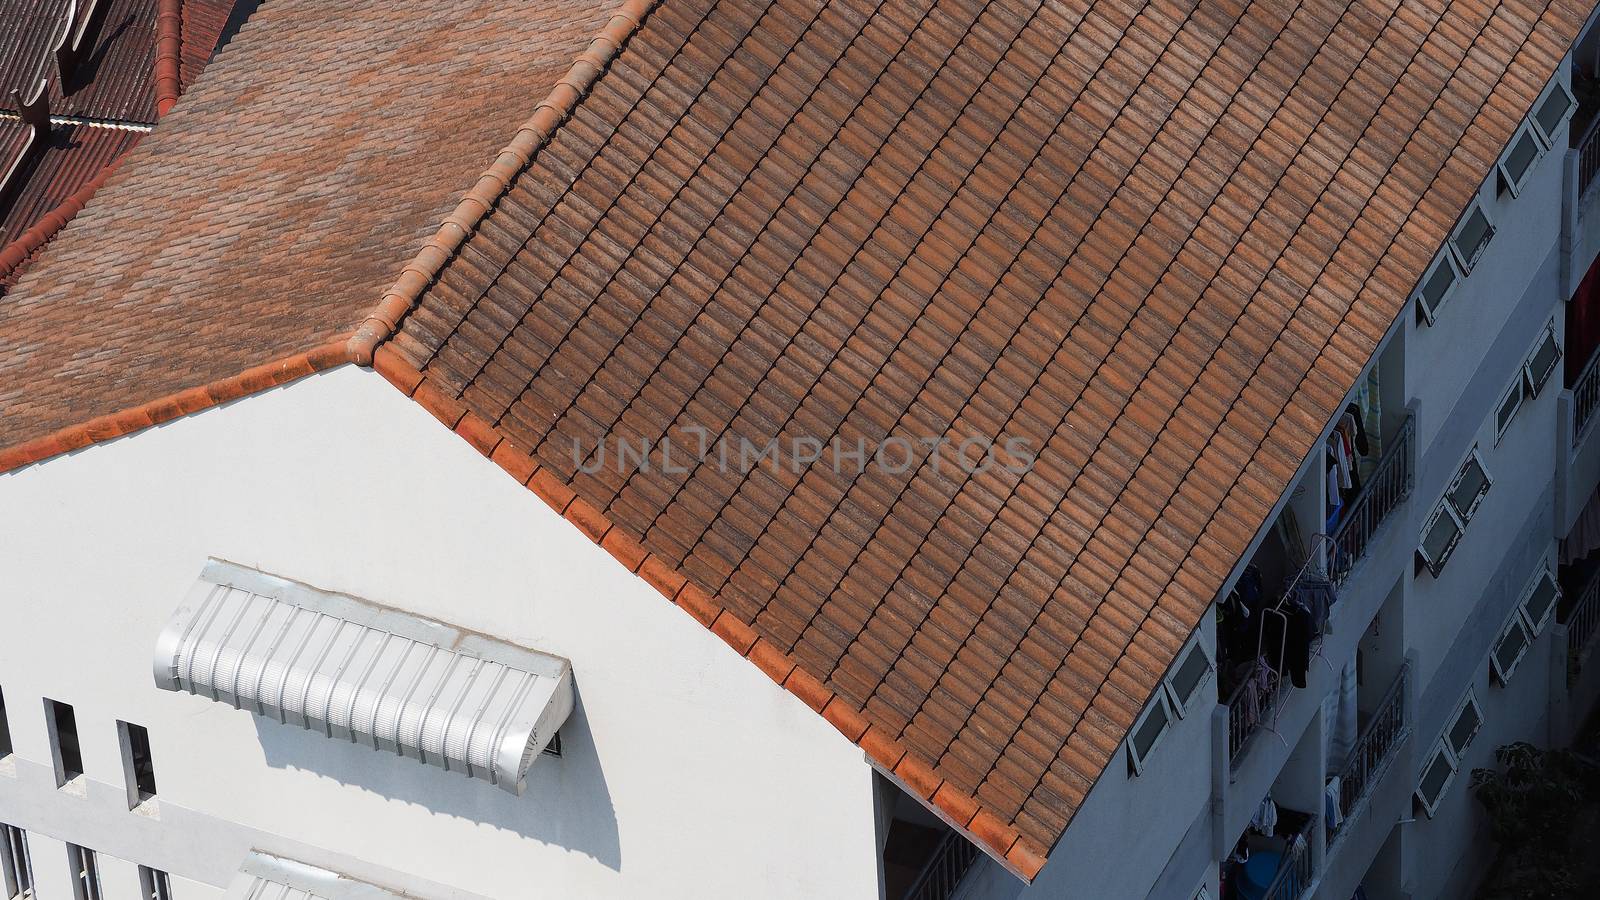 Roof tiles and made from ceramic and metal material and top view angle.